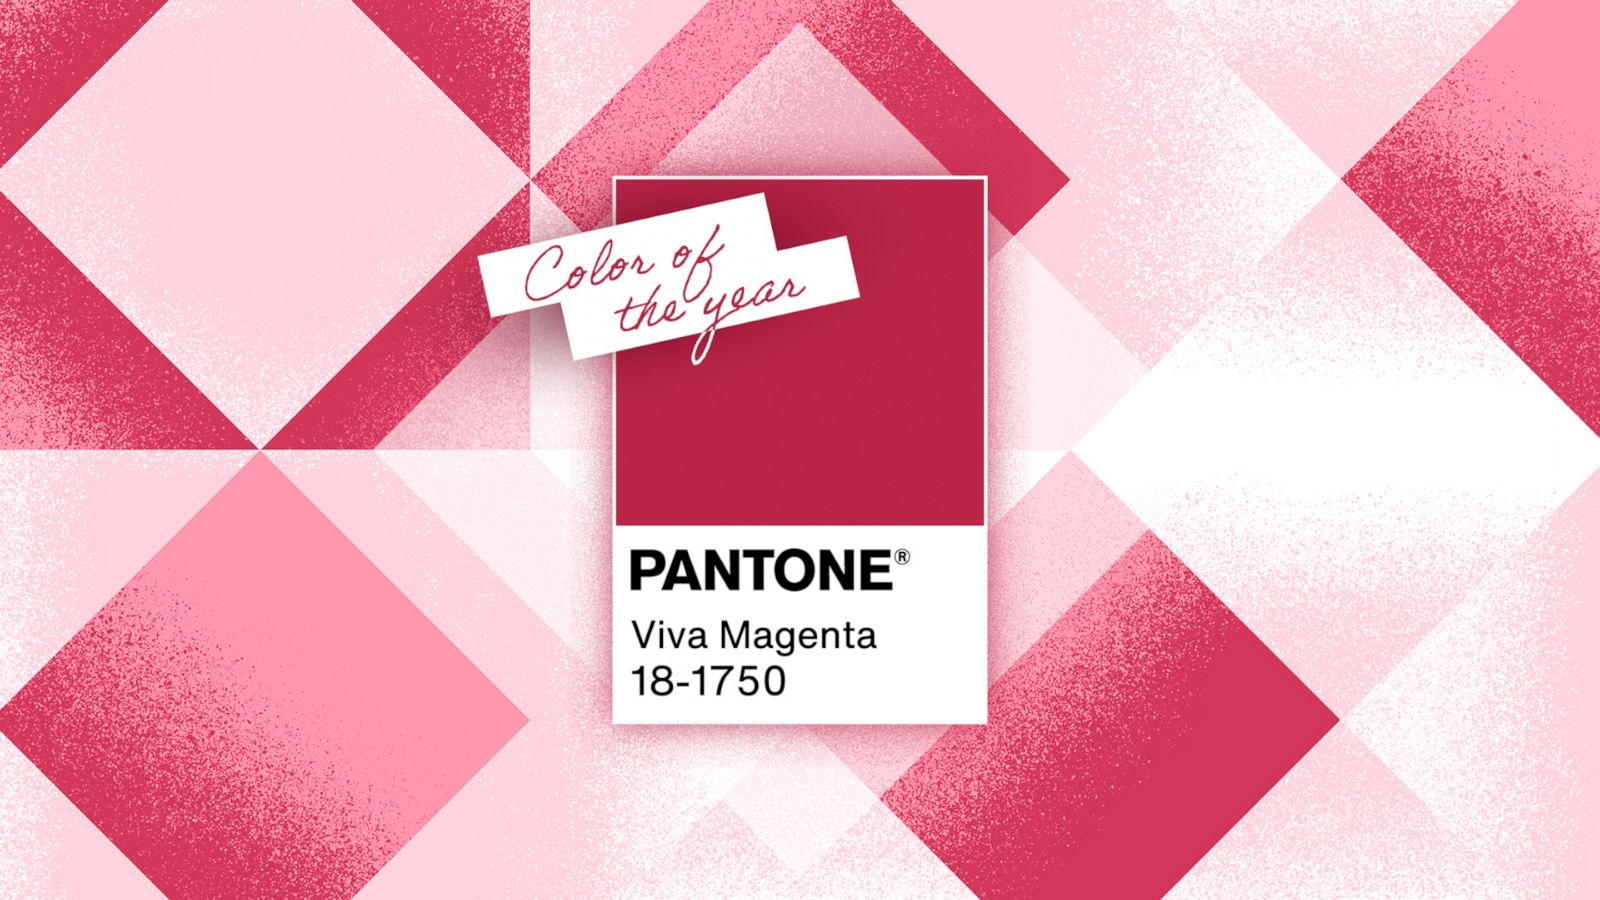 Viva Magenta: Pantone's 2023 Color of the Year revealed